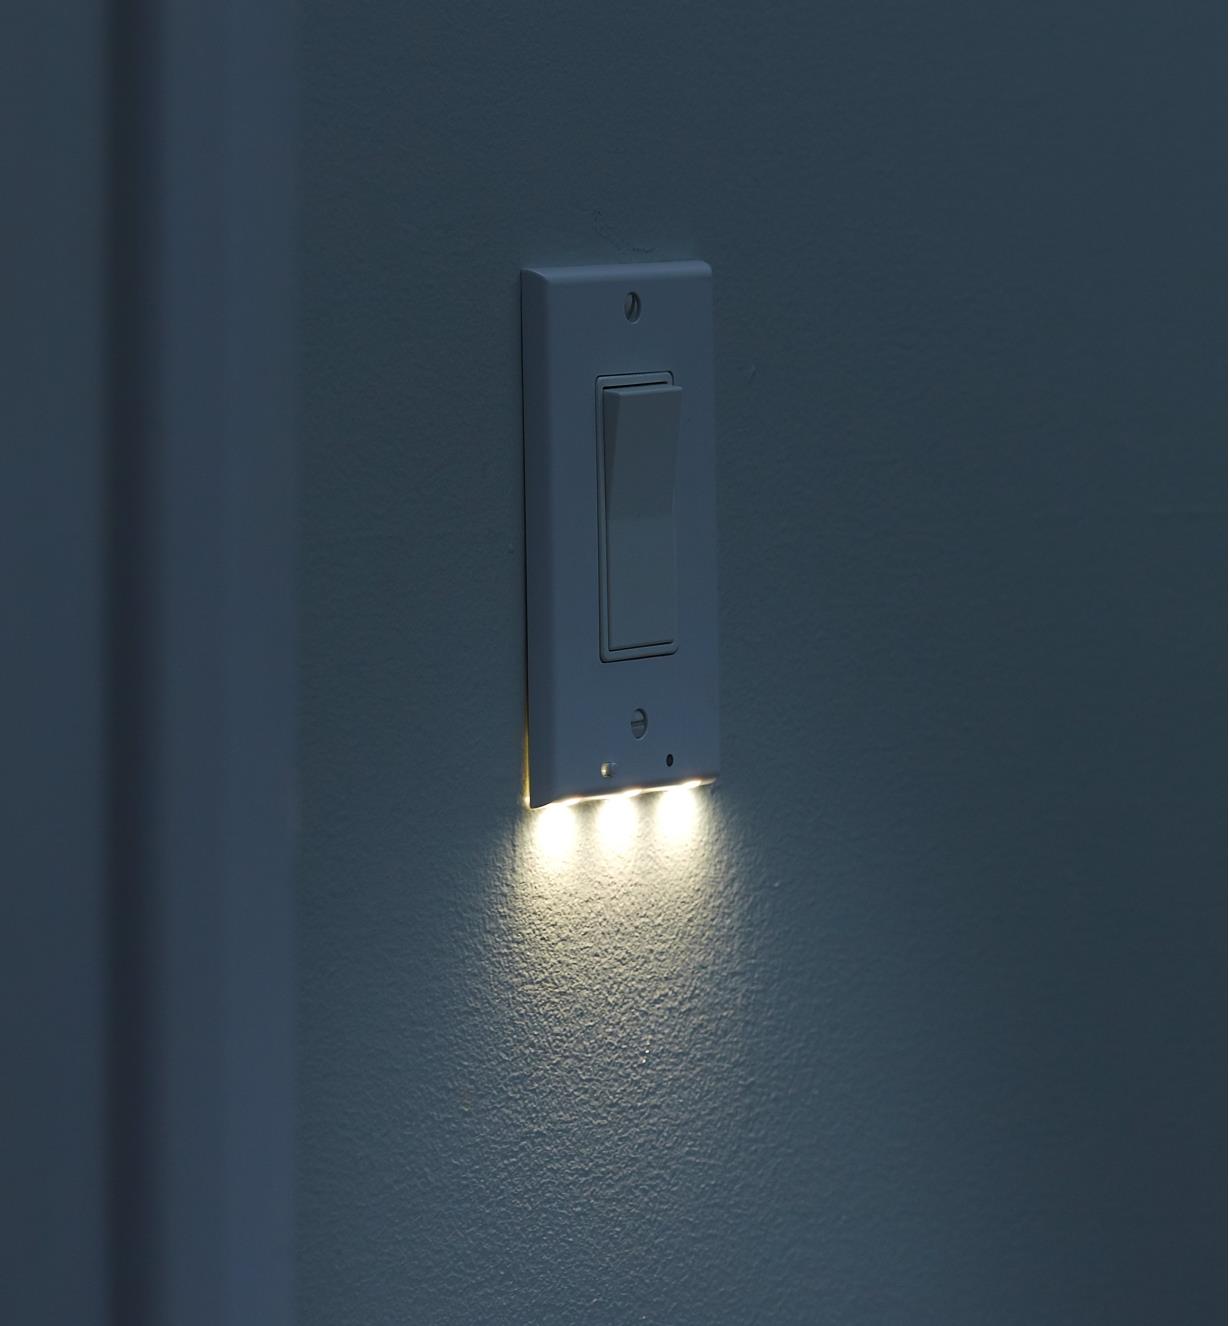 An LED rocker switch cover plate mounted on a wall, giving gentle, diffused illumination at night.